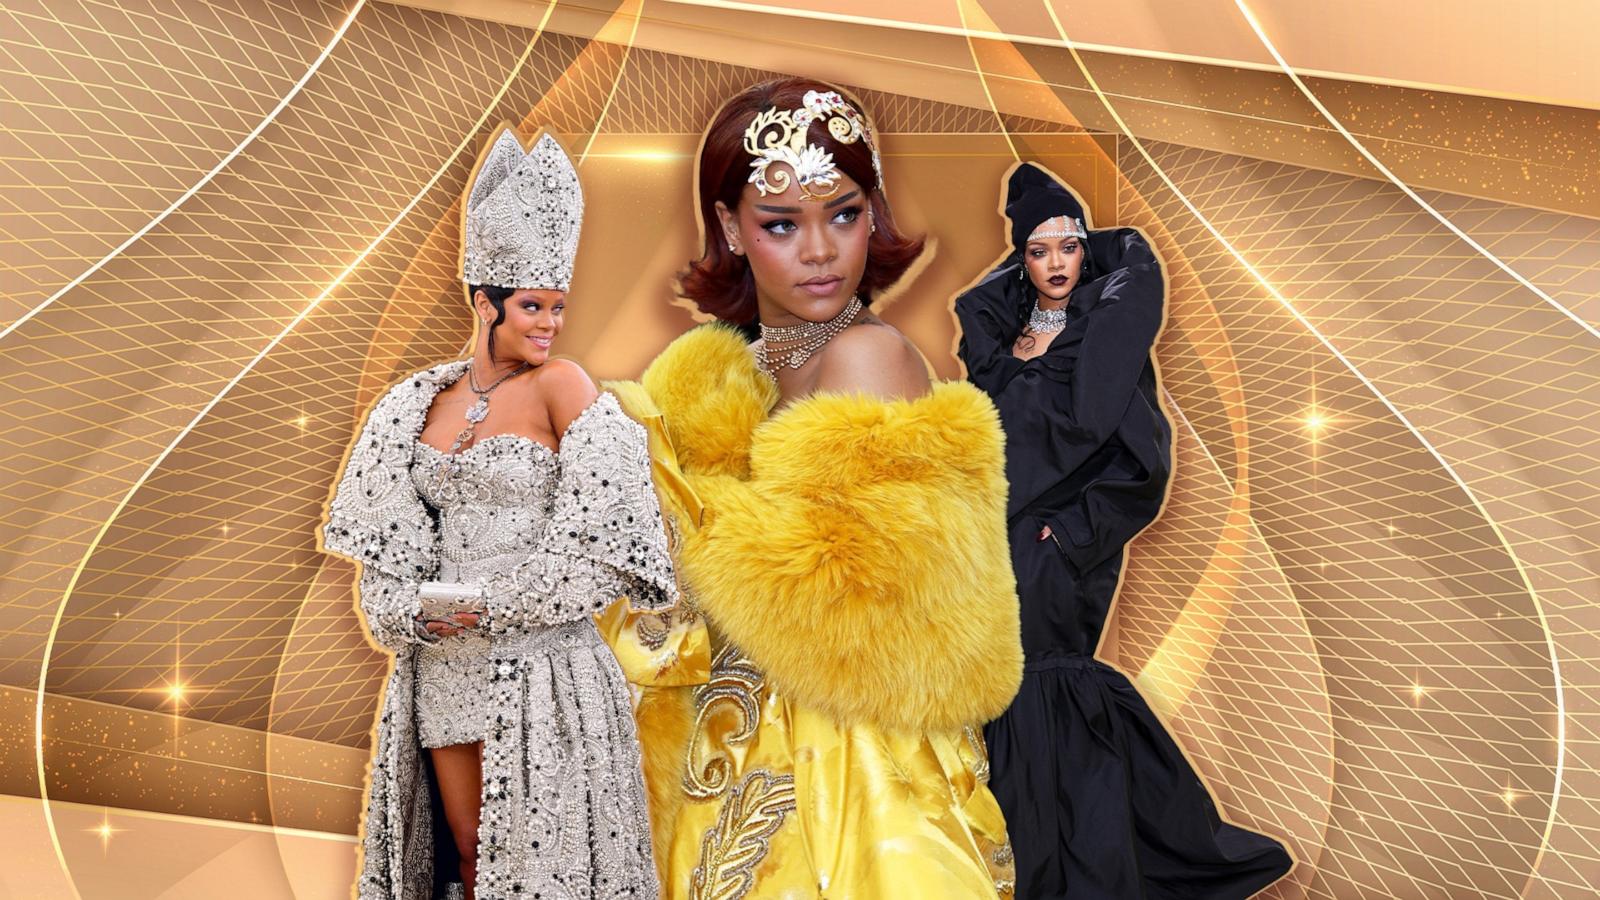 Three images of Rihanna from previous Met Gala red carpets appear in this graphic design image.